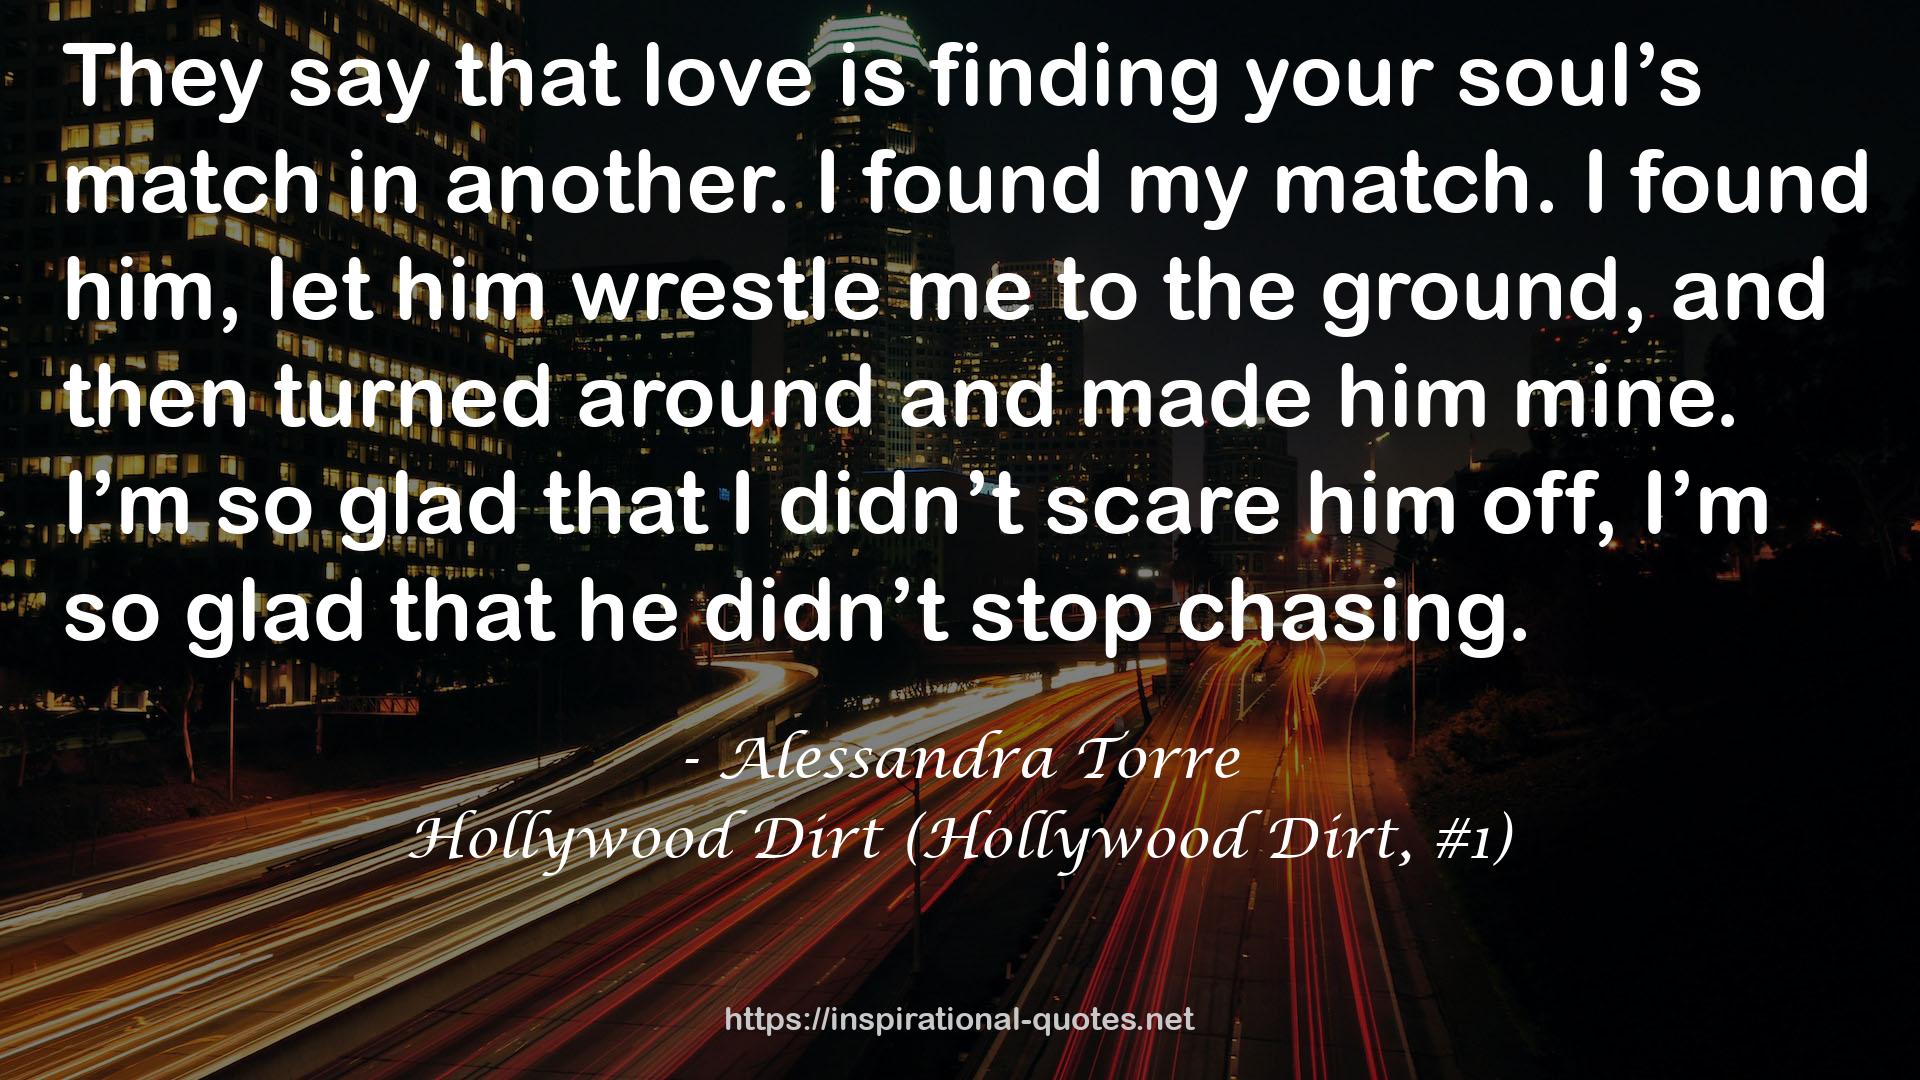 Hollywood Dirt (Hollywood Dirt, #1) QUOTES